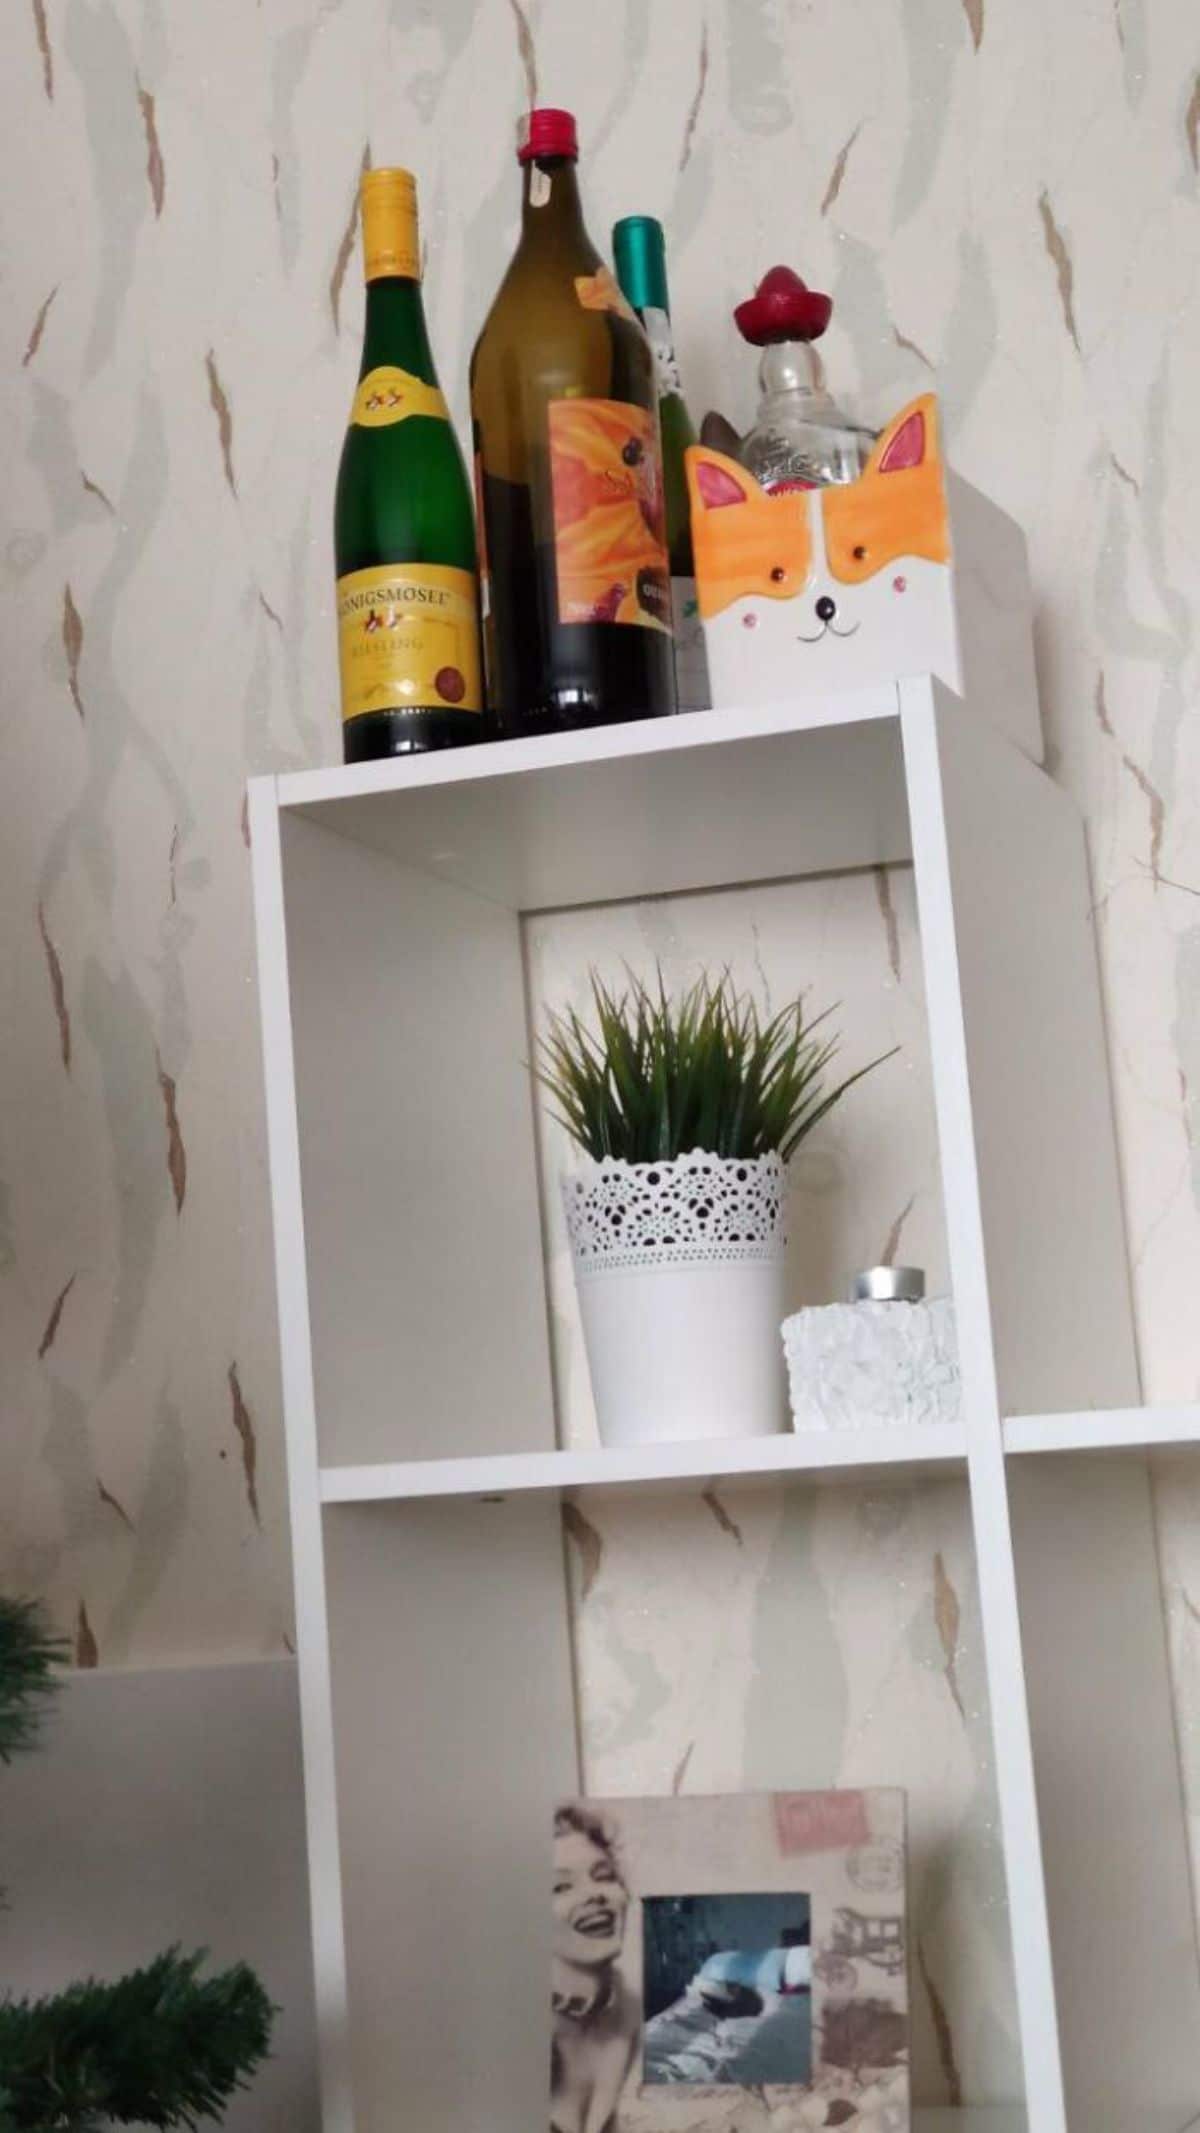 cat ears showing behind a shiba inu box and some bottles at the top of a white shelf